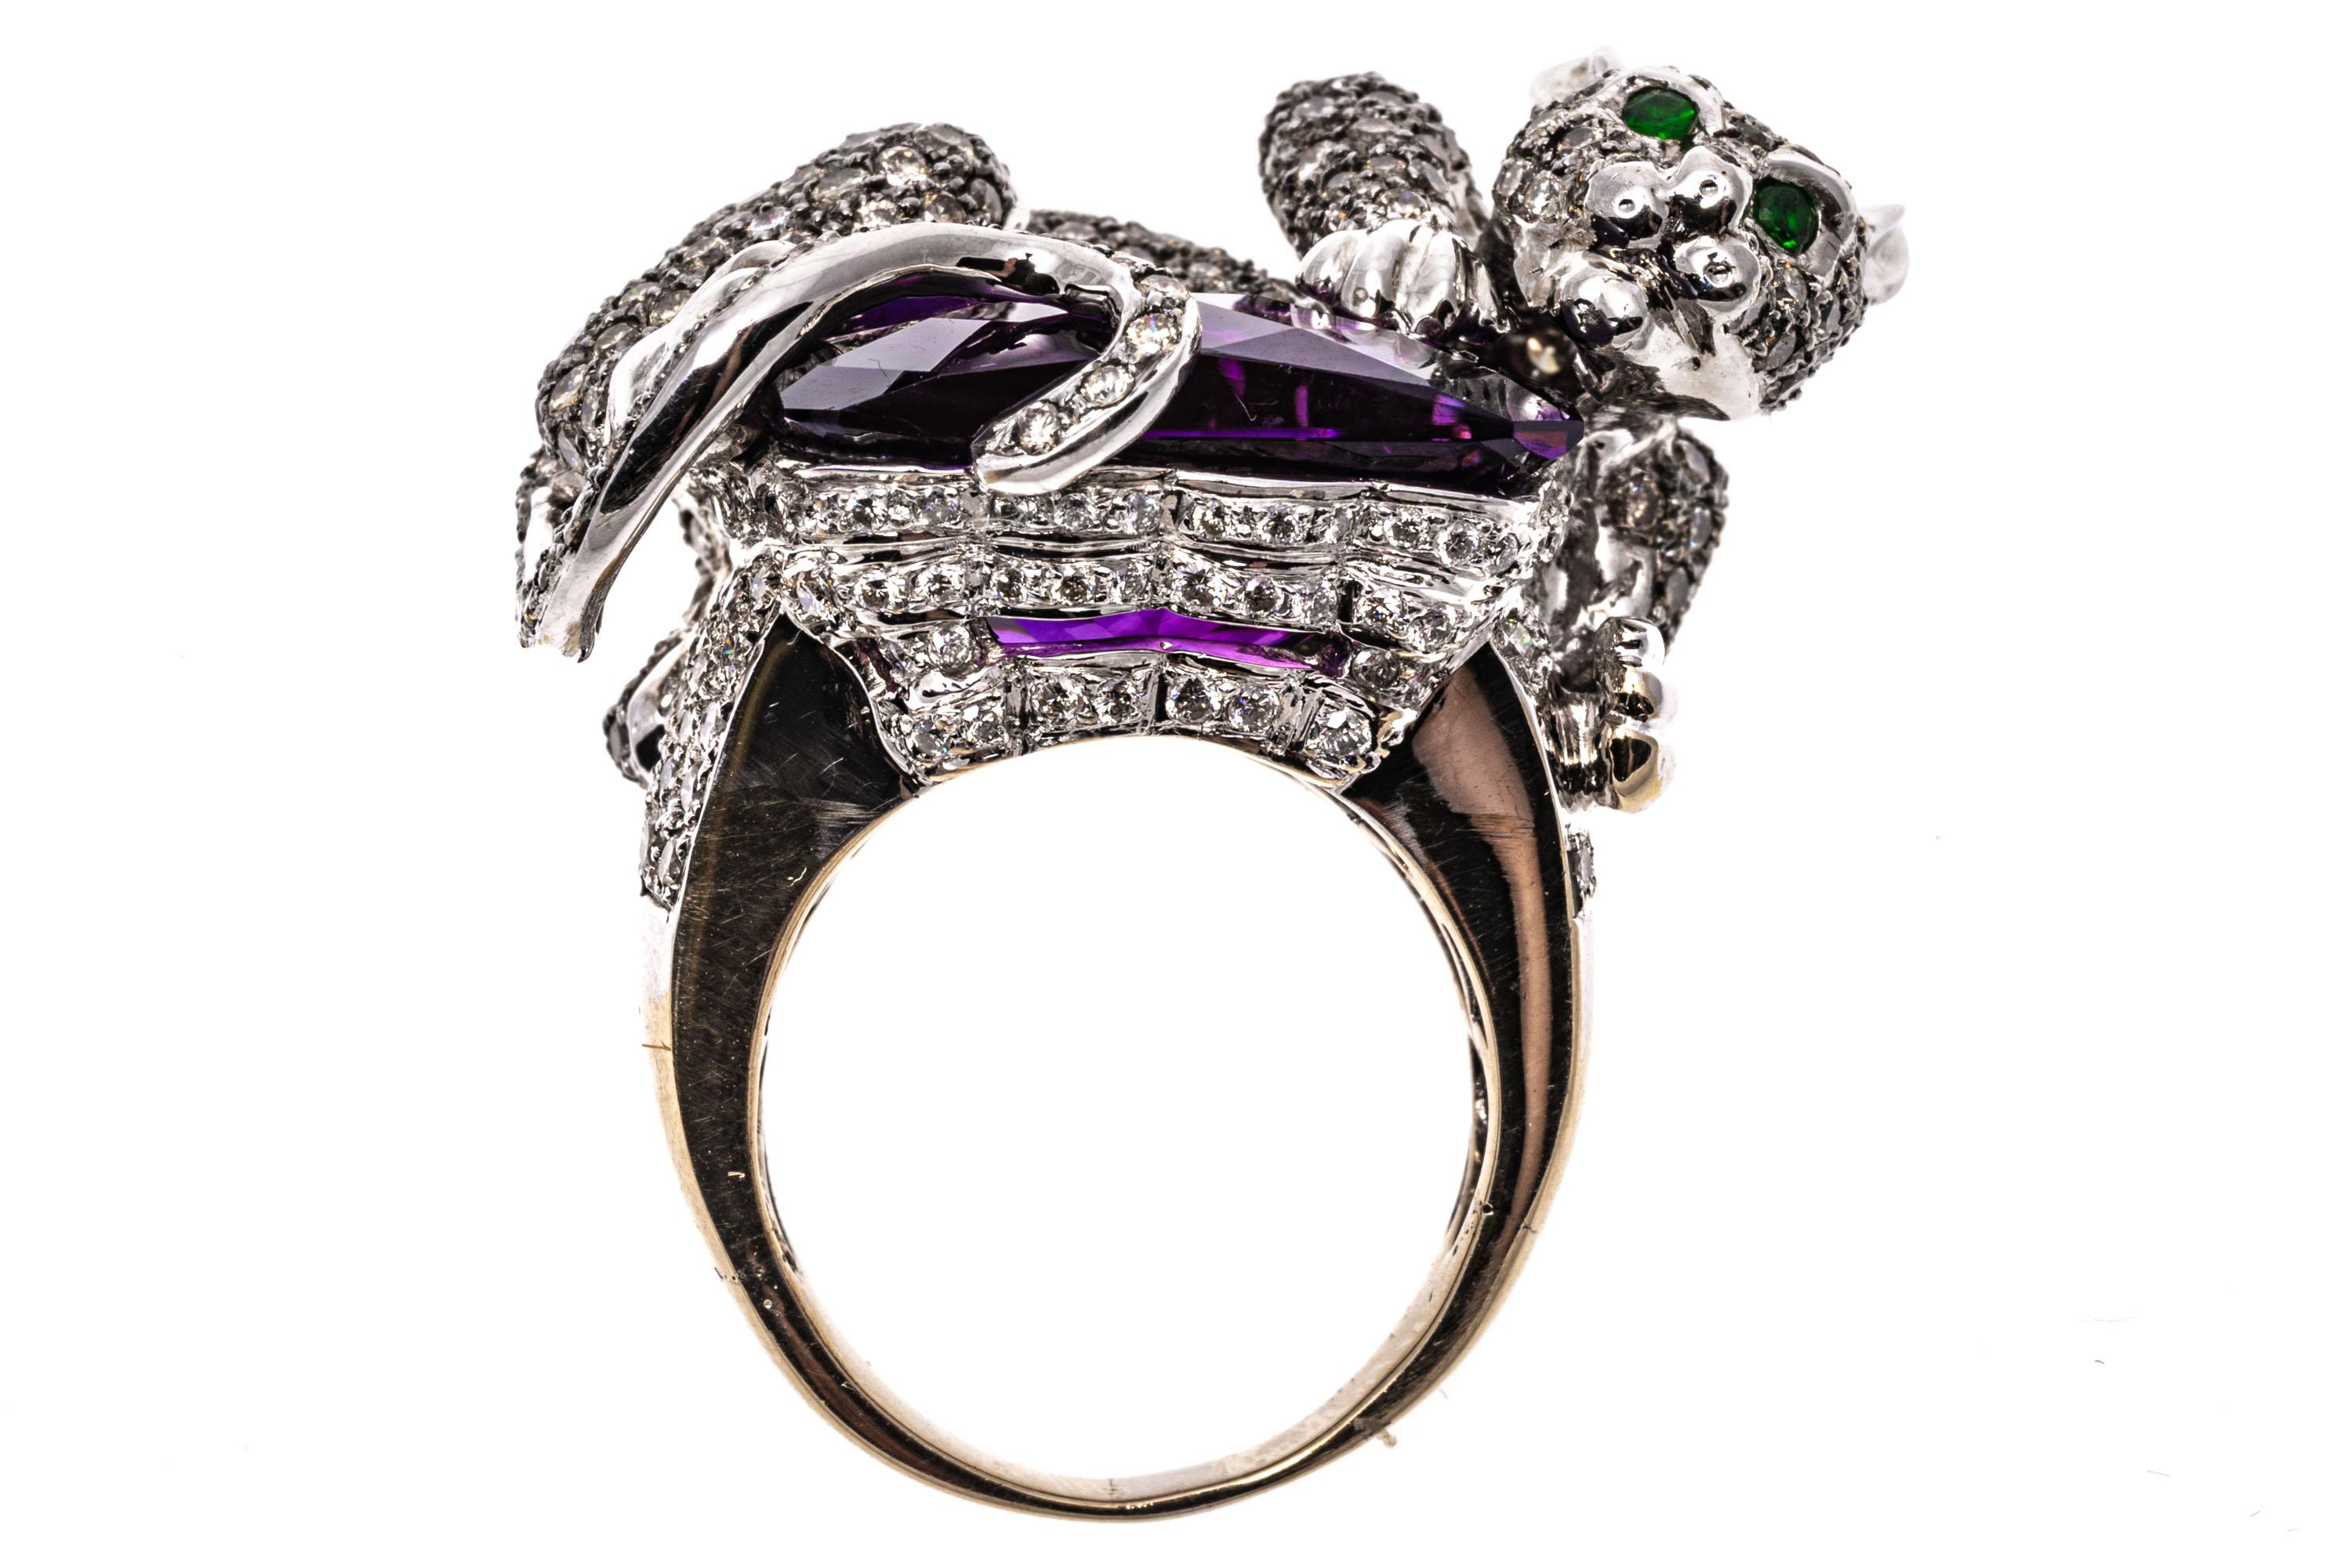 14k Gold Pave Diamond Panther Ring Atop An Amethyst, App. 13.64 CTS 3